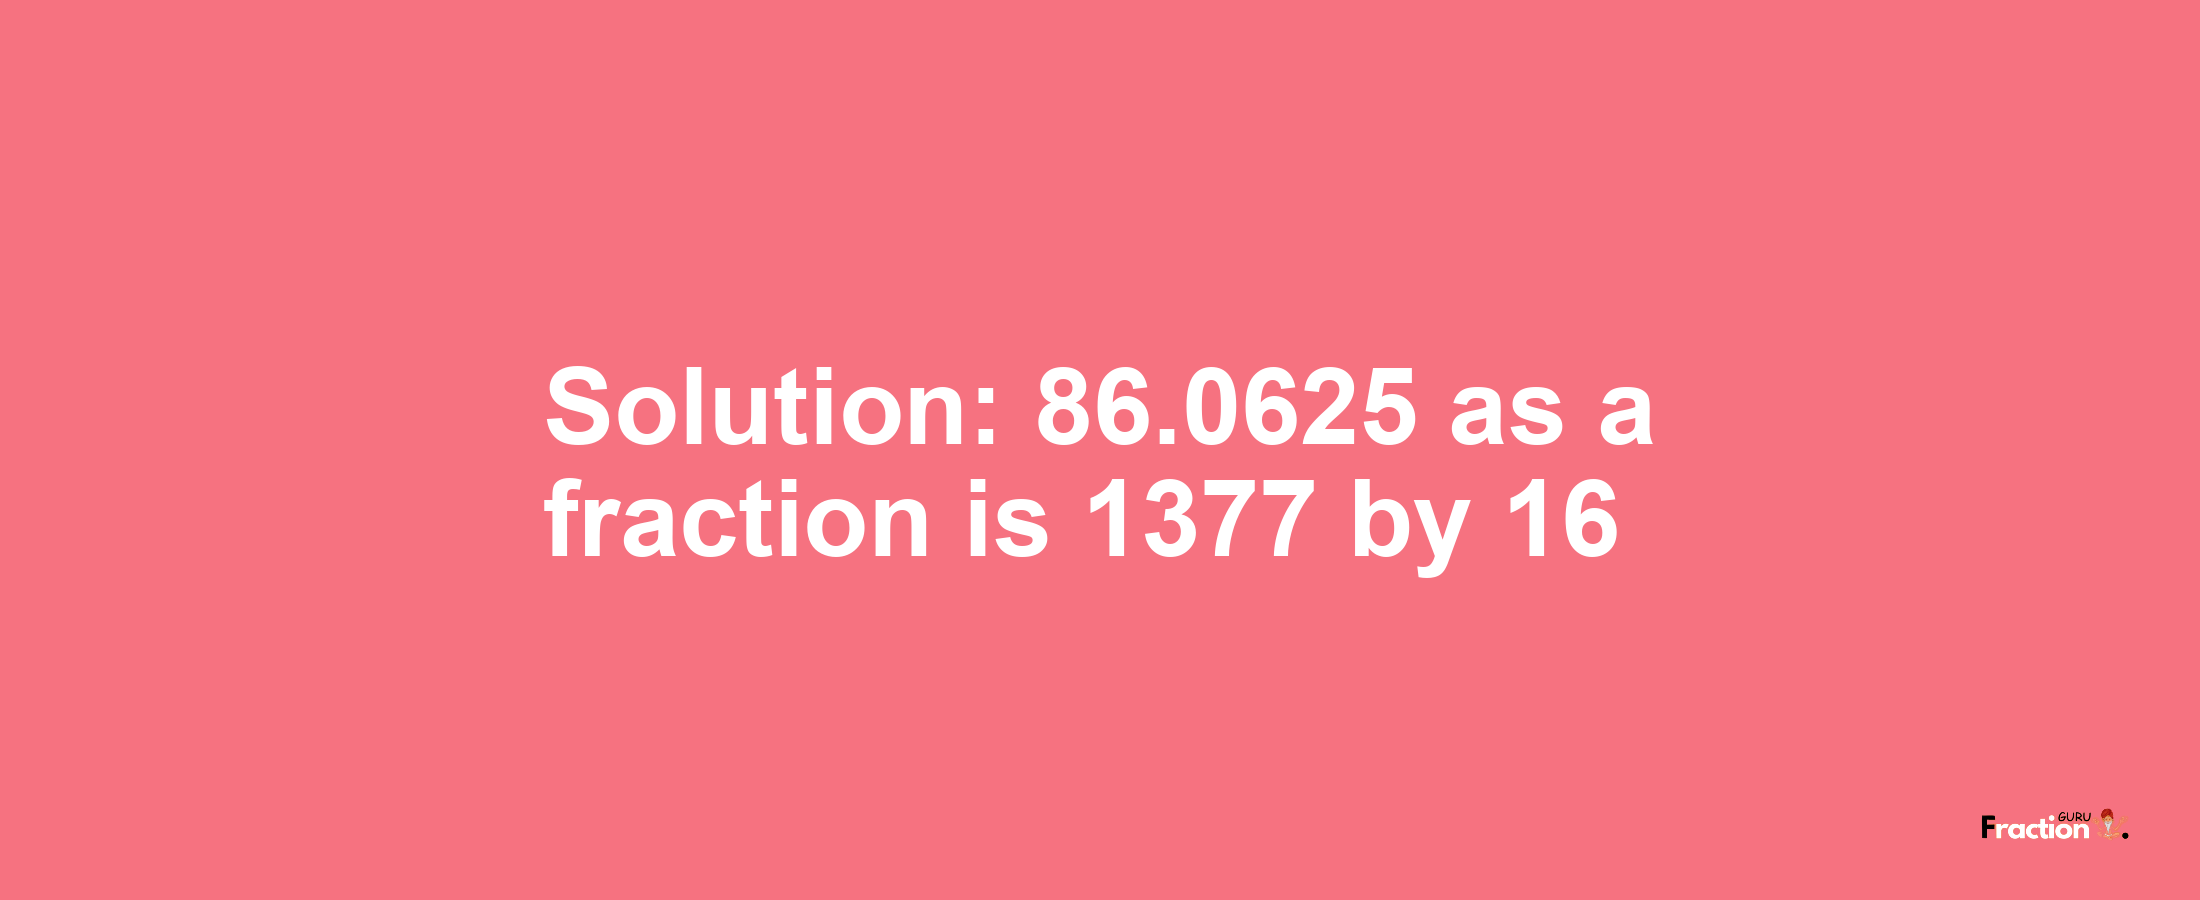 Solution:86.0625 as a fraction is 1377/16